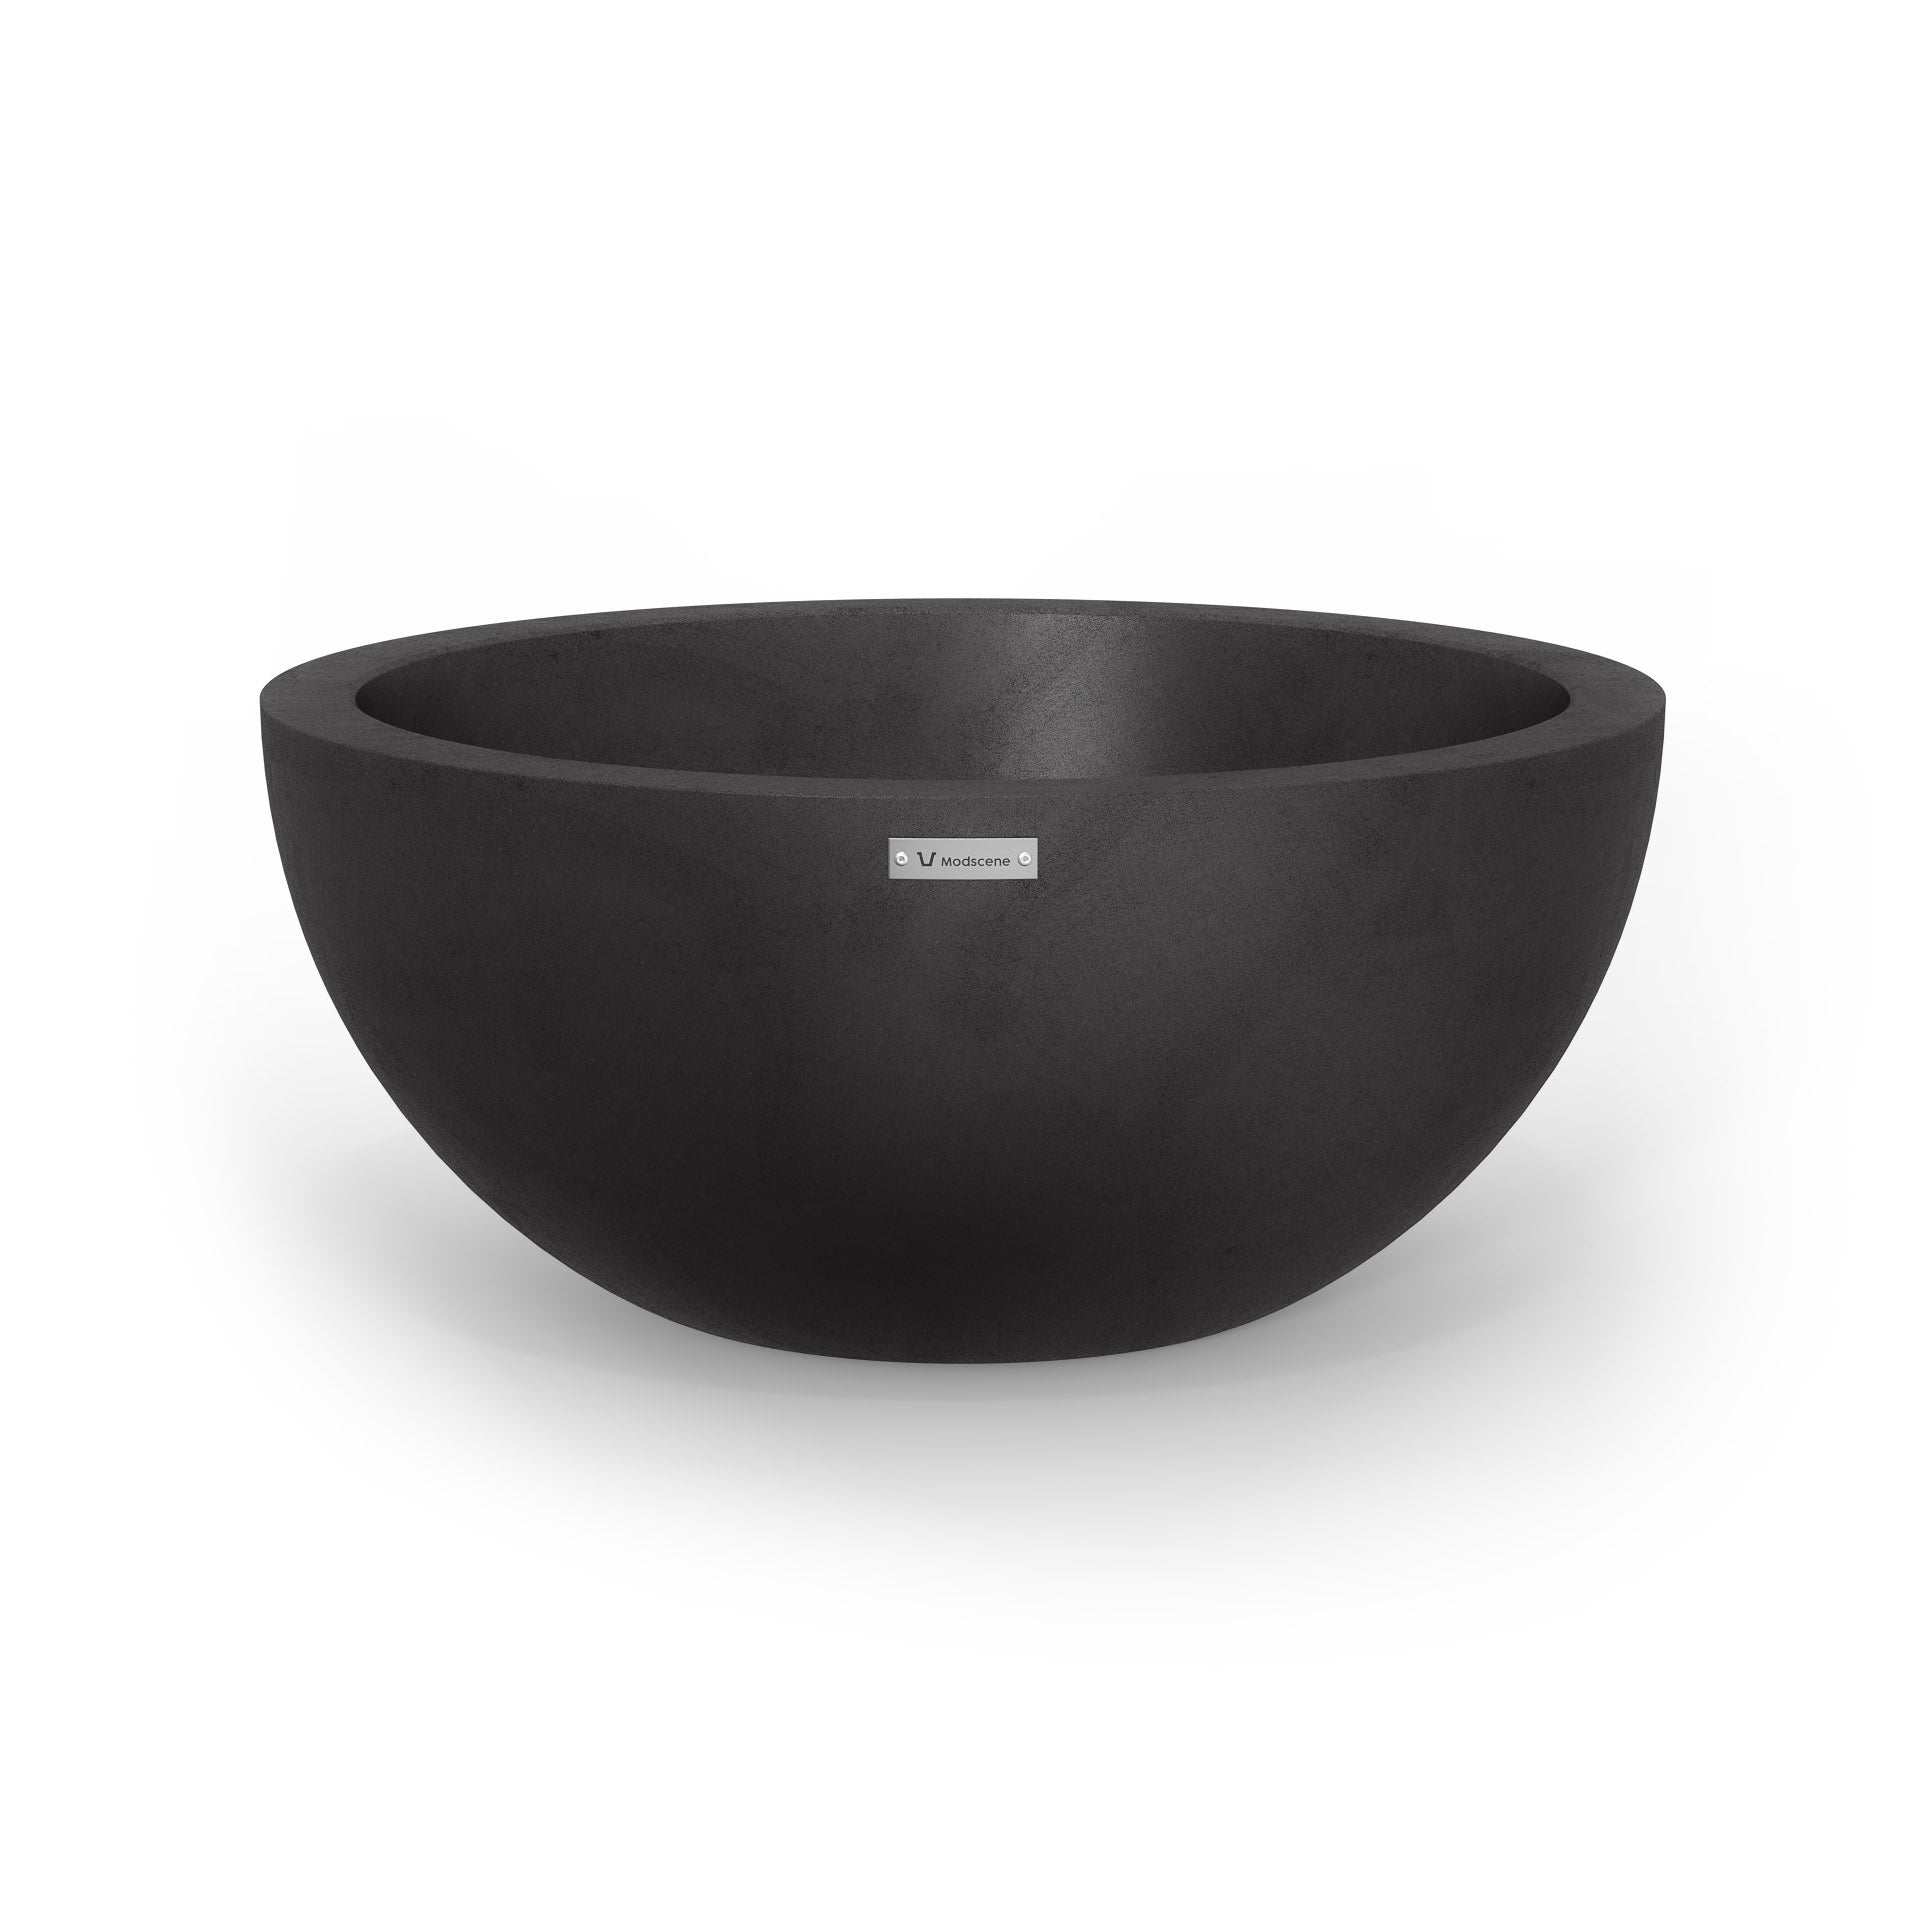 A large planter bowl in a matte black colour made by Modscene. Australian planters.